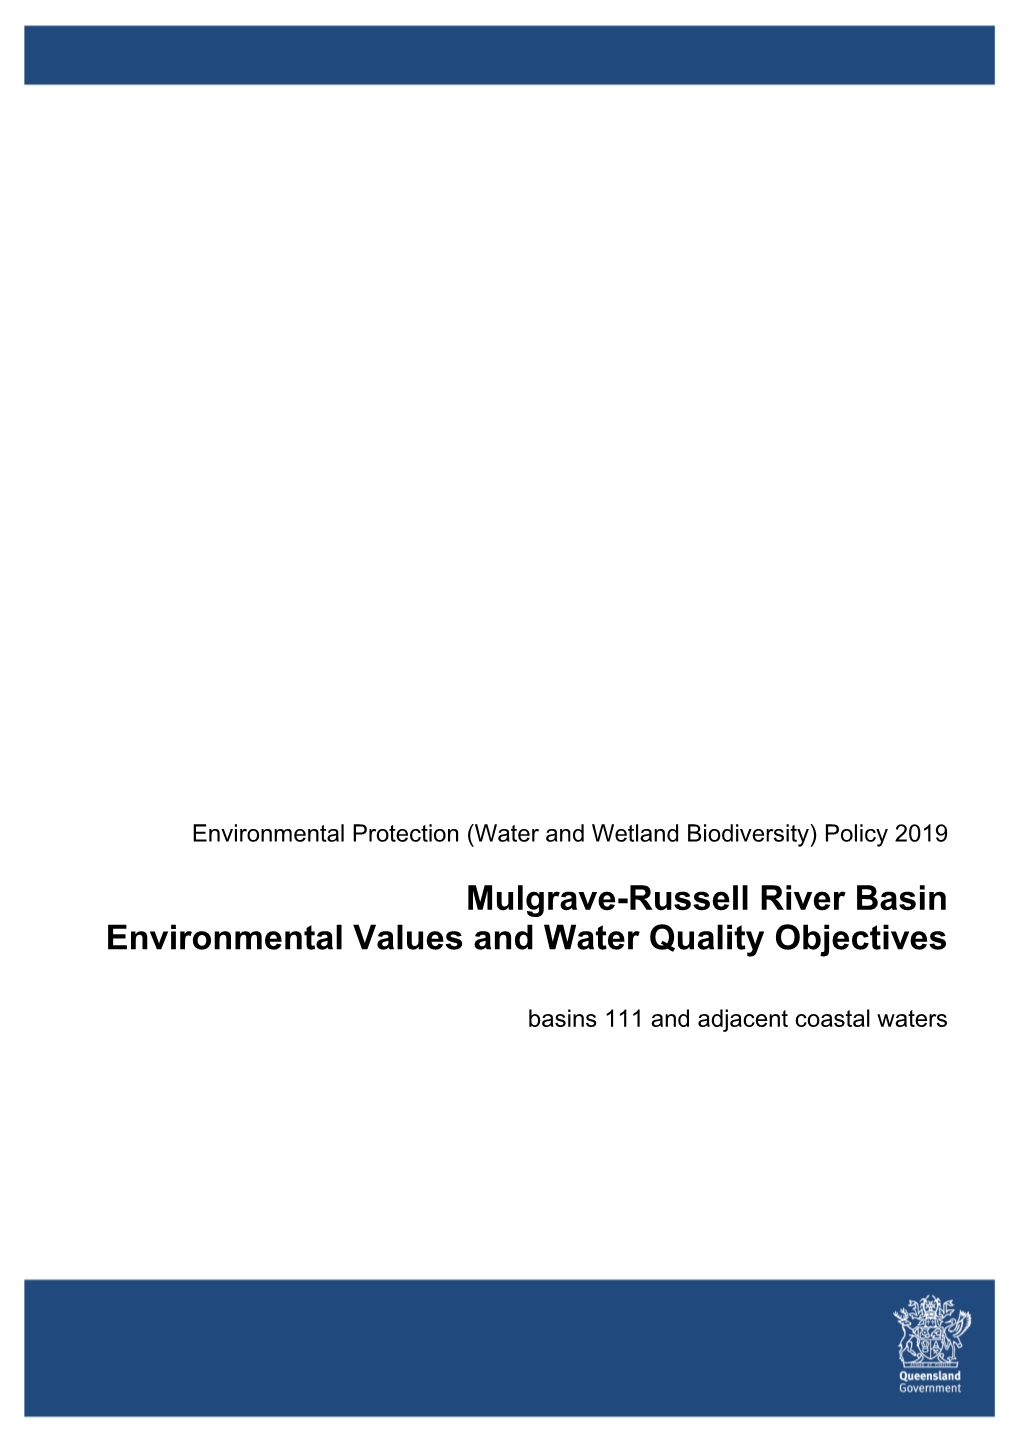 Mulgrave-Russell River Basin Environmental Values and Water Quality Objectives